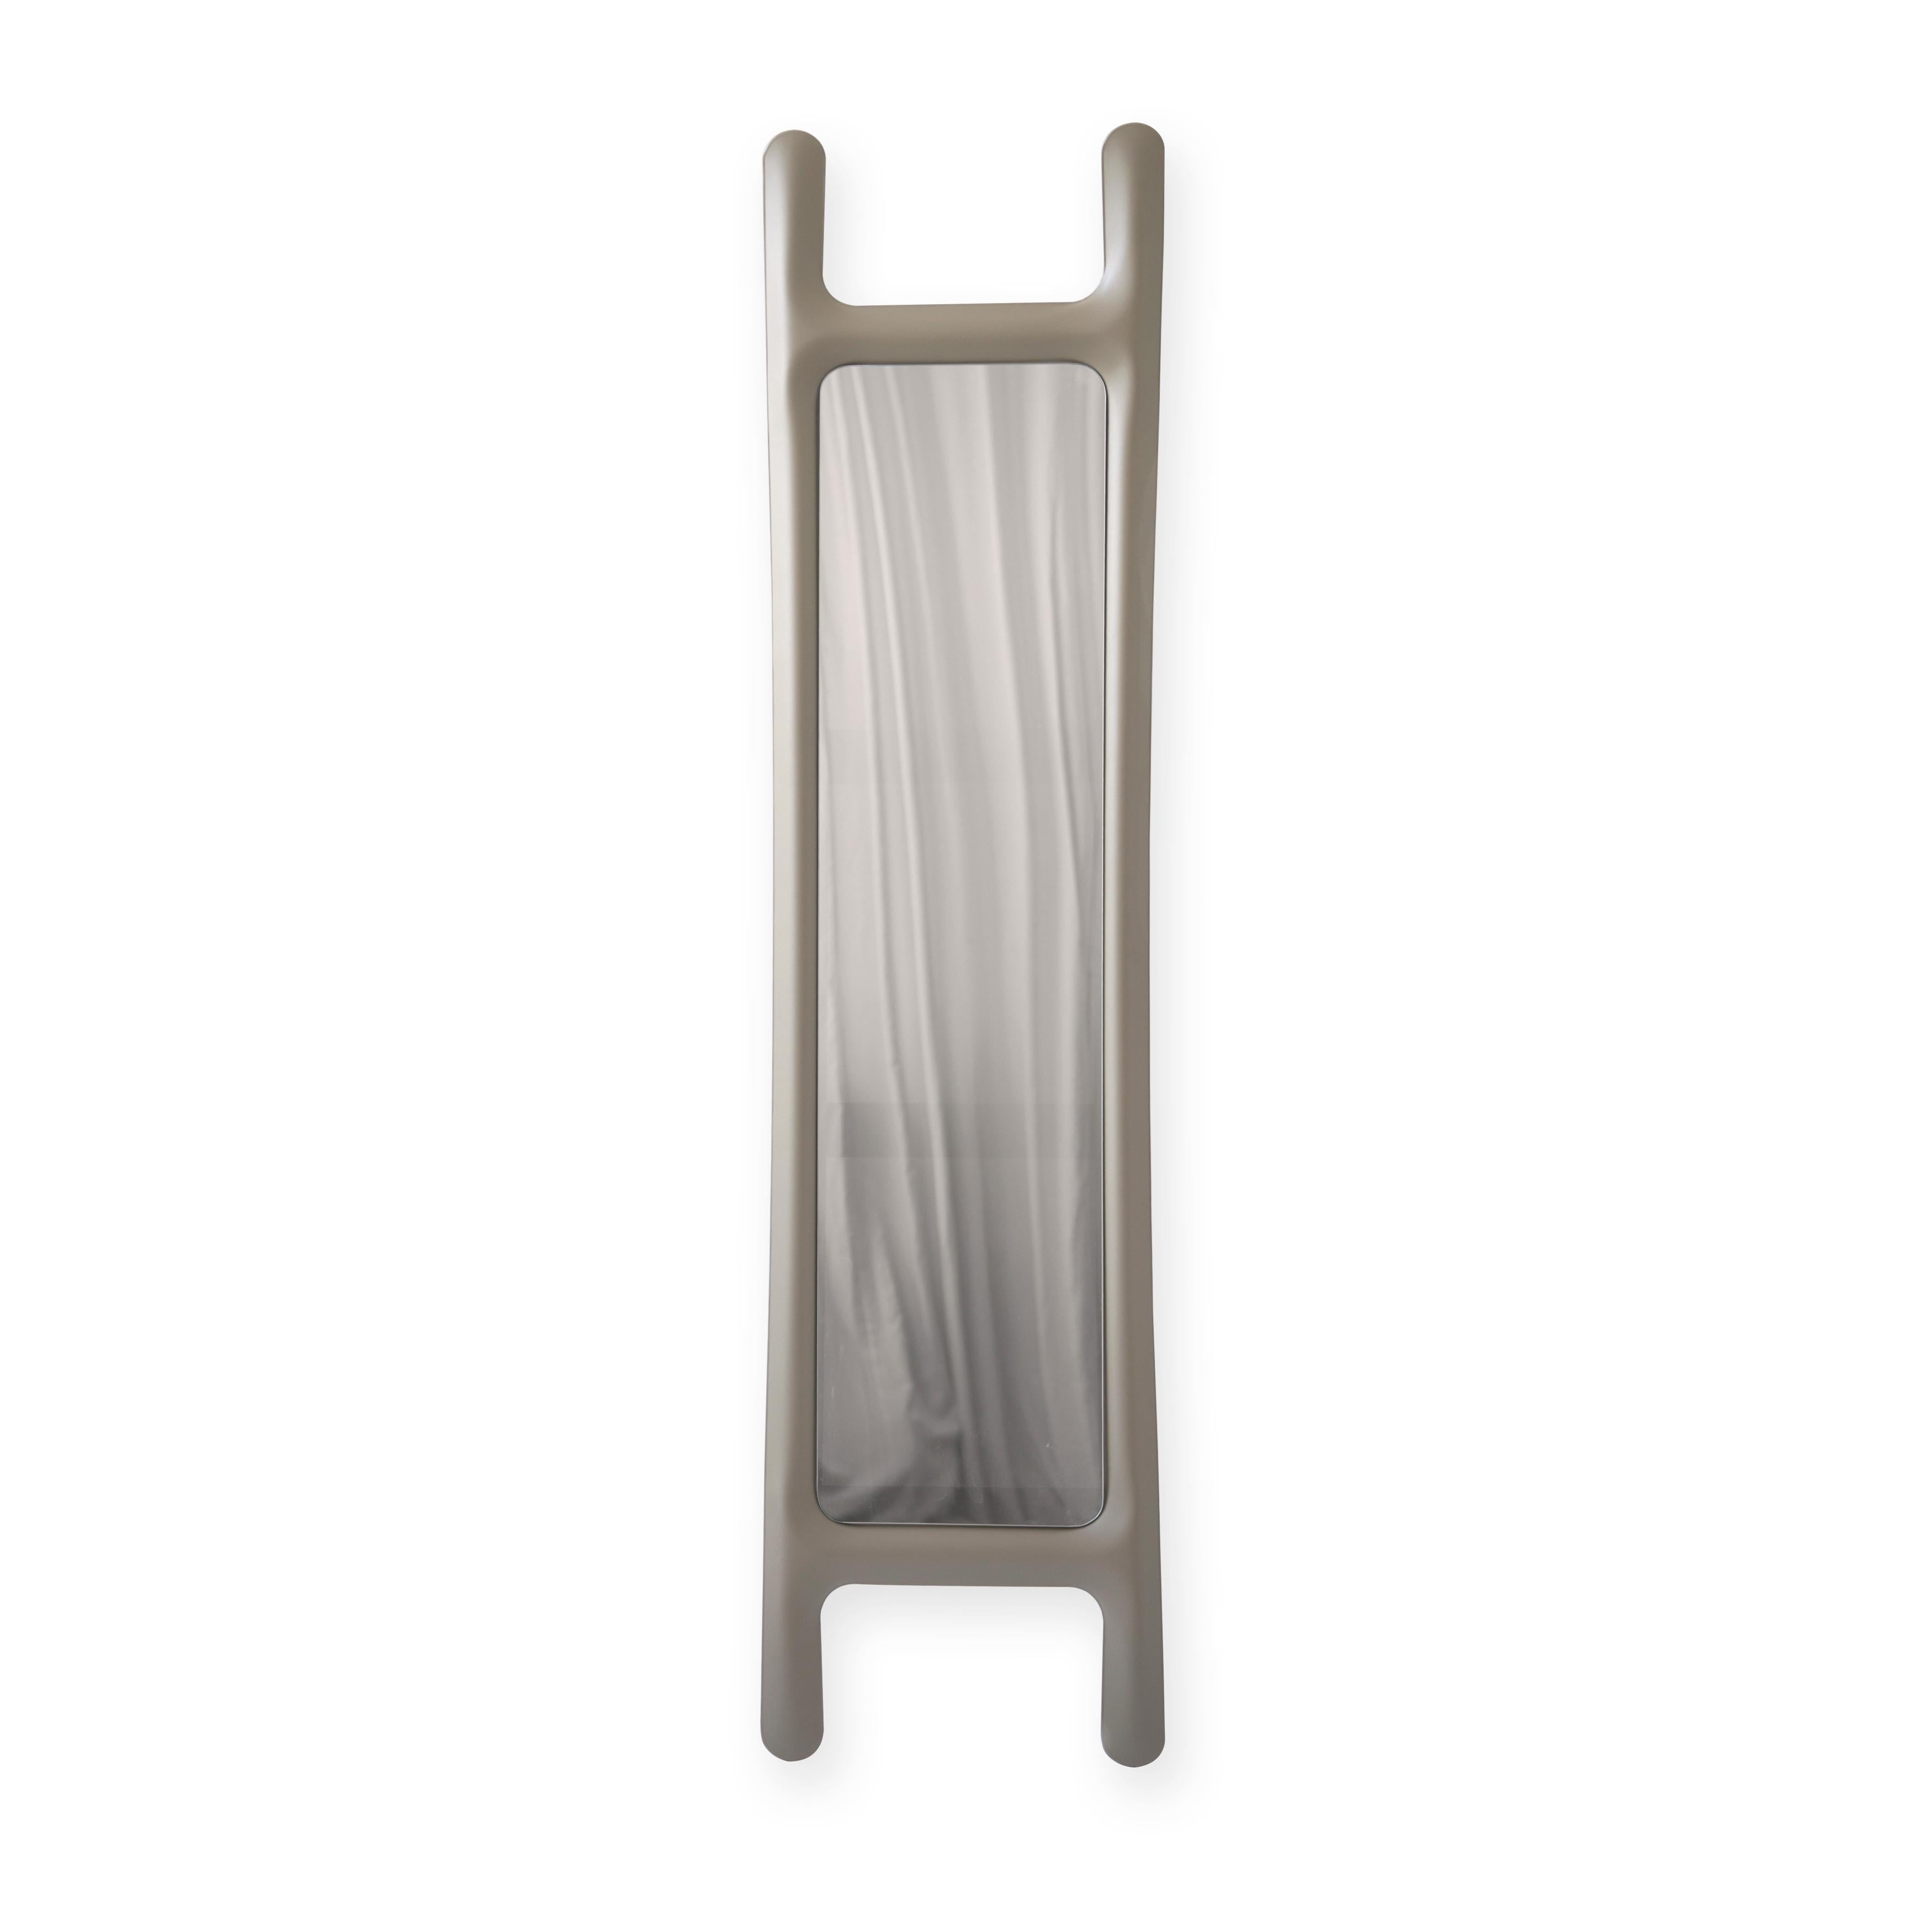 Beige drab sculptural wall mirror by Zieta
Dimensions: D 6 x W 46 x H 188 cm 
Material: Mirror, carbon steel. 
Finish: Powder-coated in beige grey matt.
Also available in colors: stainless steel, or powder-coated. 


A DRAB mirror is an